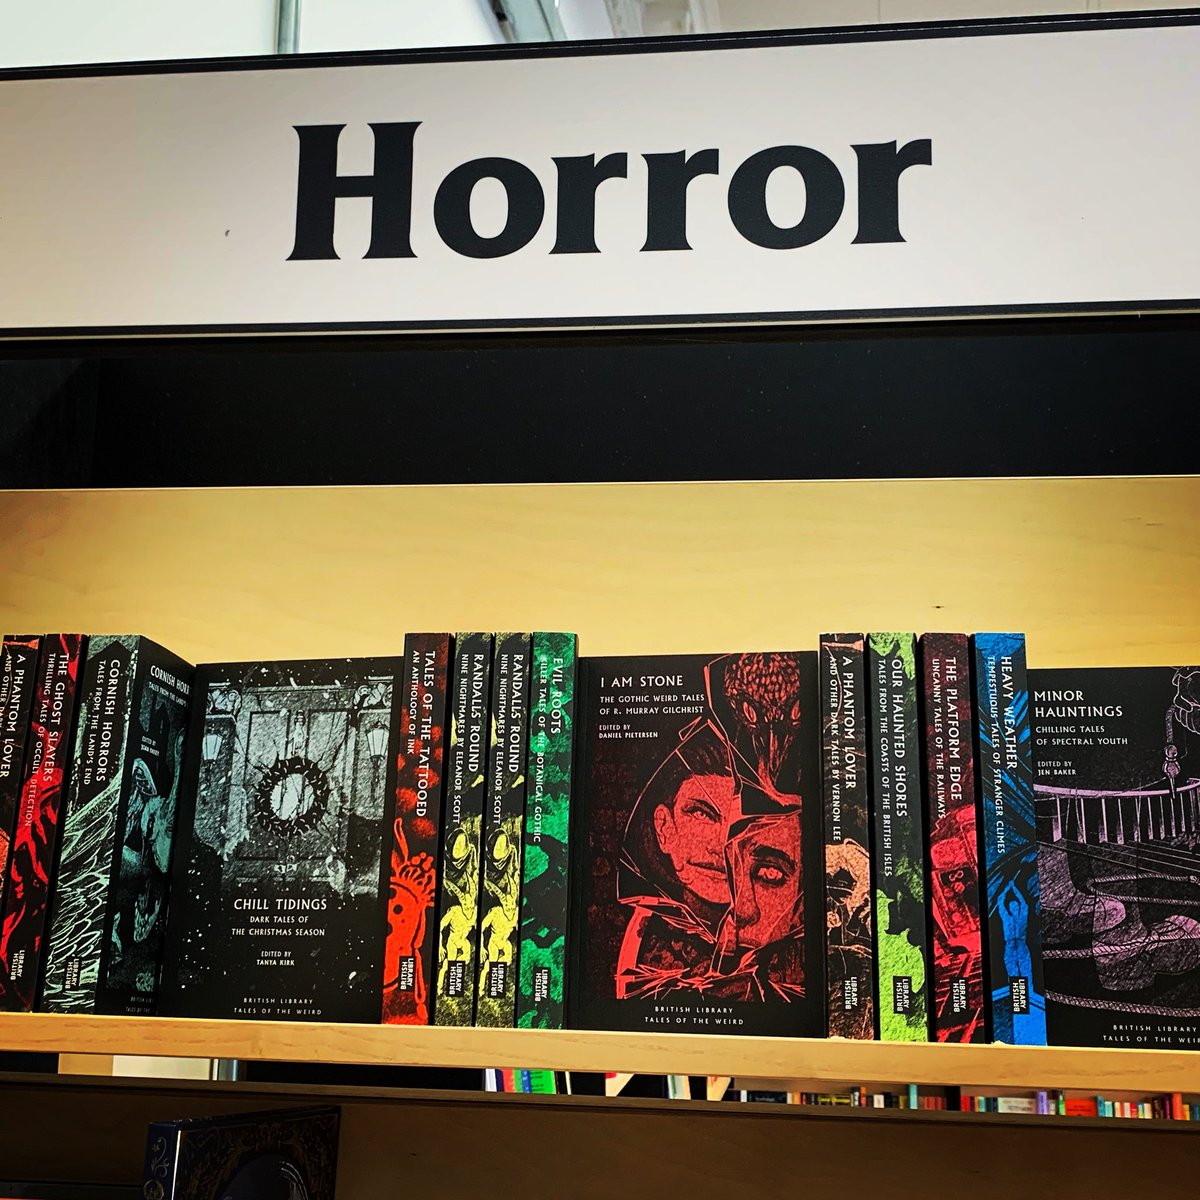 Popped into @argonaut_books for a chat over coffee and what do I spy with my little eye?

HERE COME DAT SPOOKY GANG!

@BL_Publishing #TalesOfTheWeird #Horror @JoanPassey @daisy2205 @bardicacademic @Jendeavour